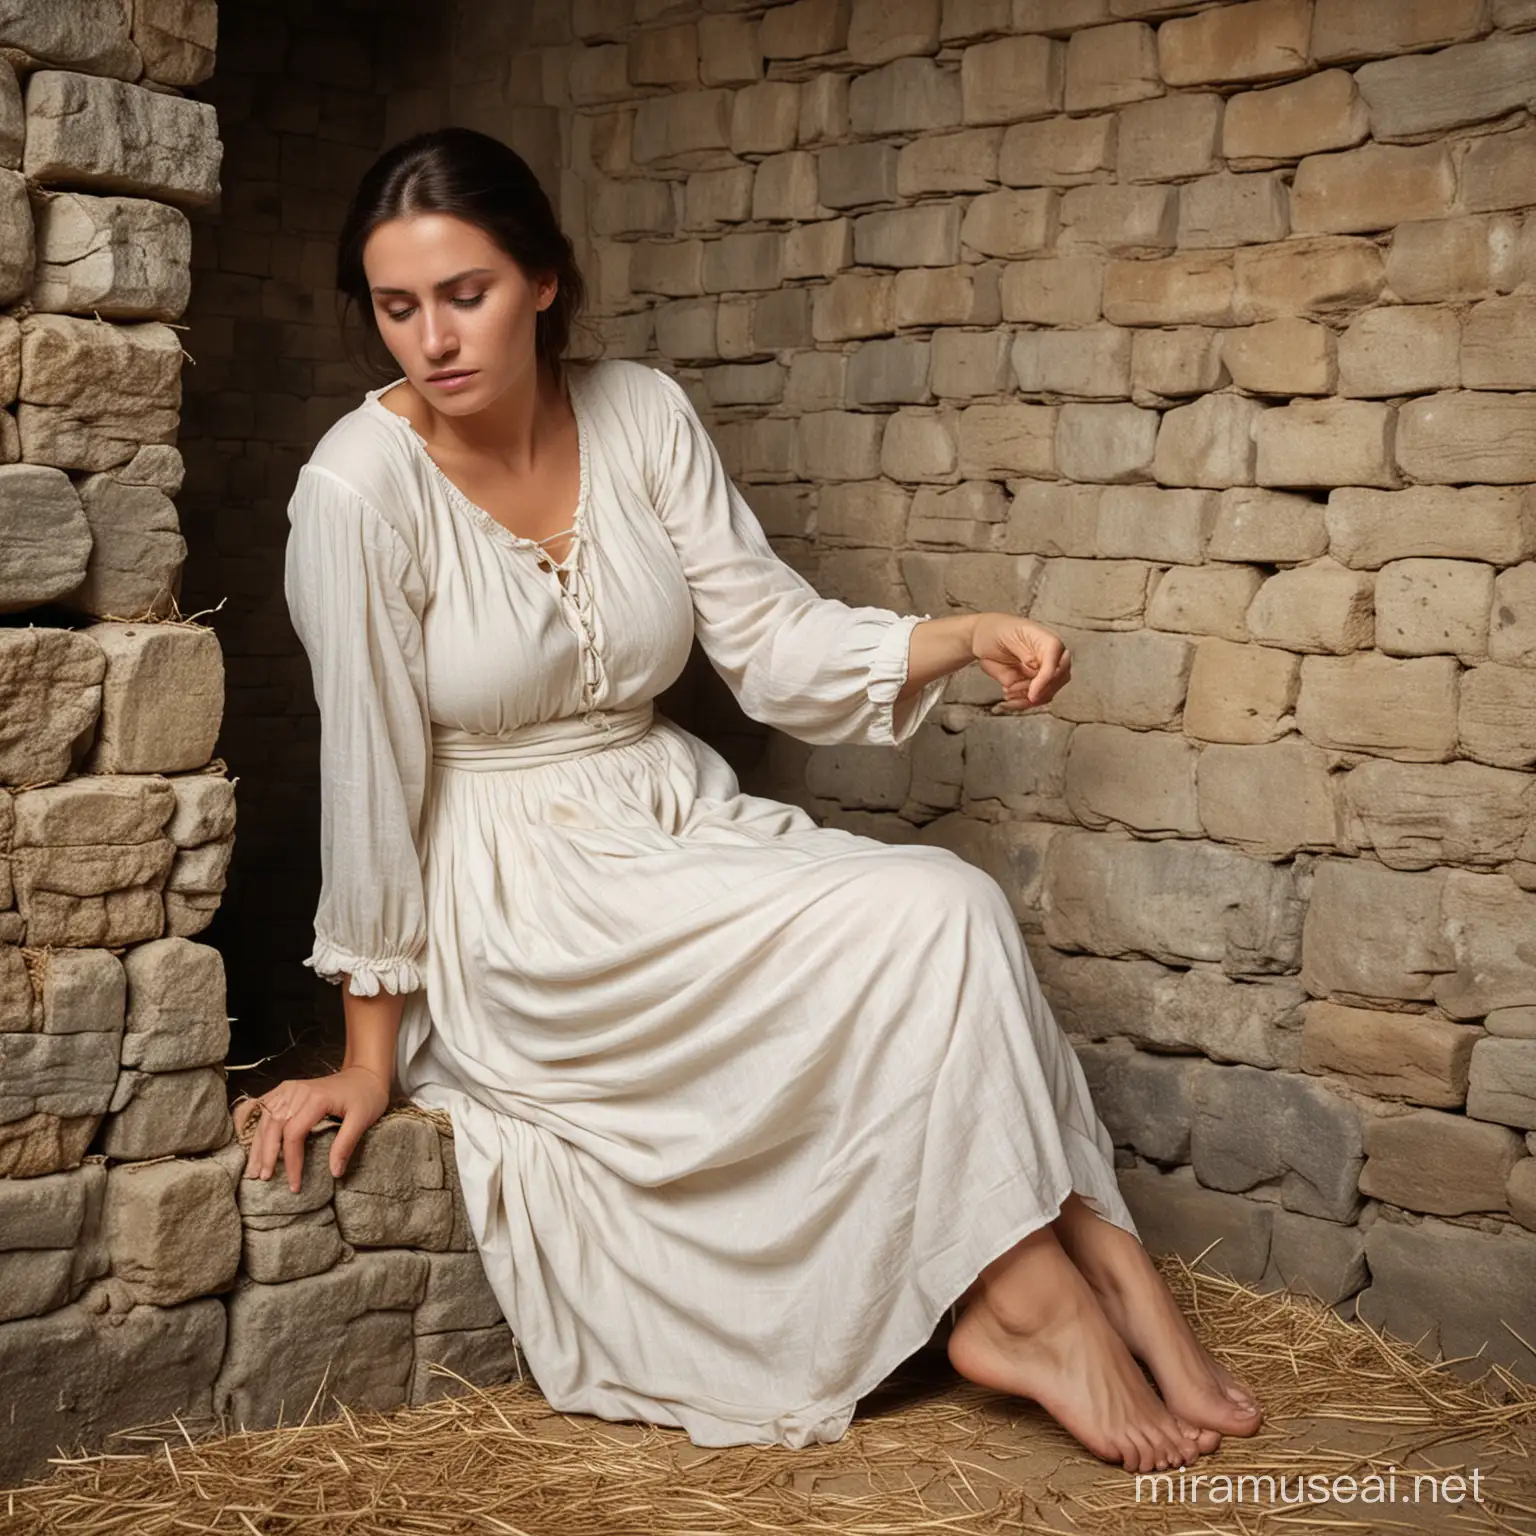  a busty slim peasant woman (30 years old, barefoot) sit on hay in the corner of a dungeoncell (Stone walls, 1600's) in dirty white longsleeve sackdress, head-to-knee view, she is sad and desperate